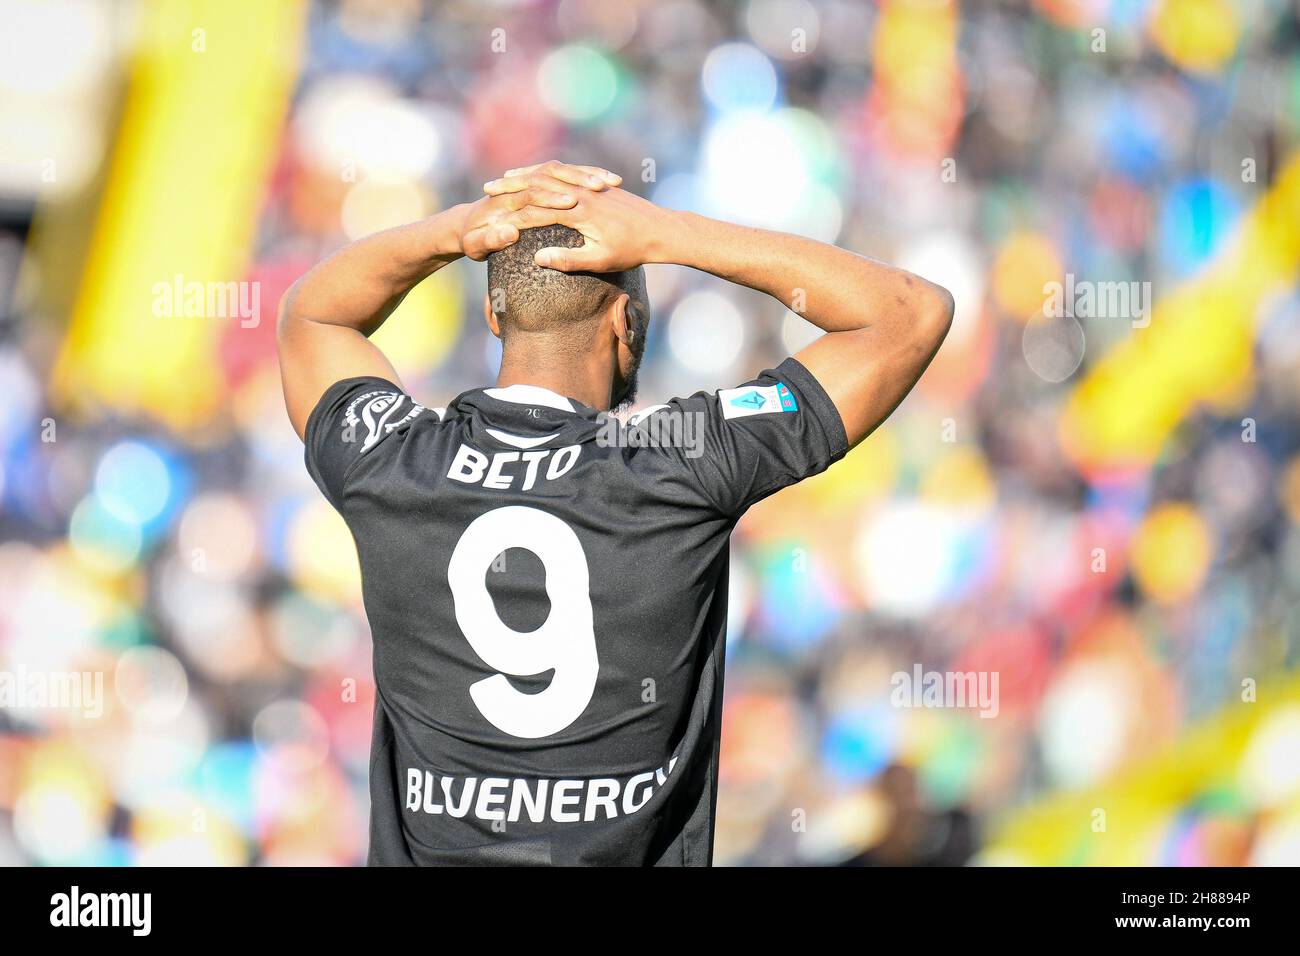 Udine, Italy. 28th Nov, 2021. Norberto Bercique Gomes Betuncal (Udinese) reacts after missing the goal during Udinese Calcio vs Genoa CFC, italian soccer Serie A match in Udine, Italy, November 28 2021 Credit: Independent Photo Agency/Alamy Live News Stock Photo